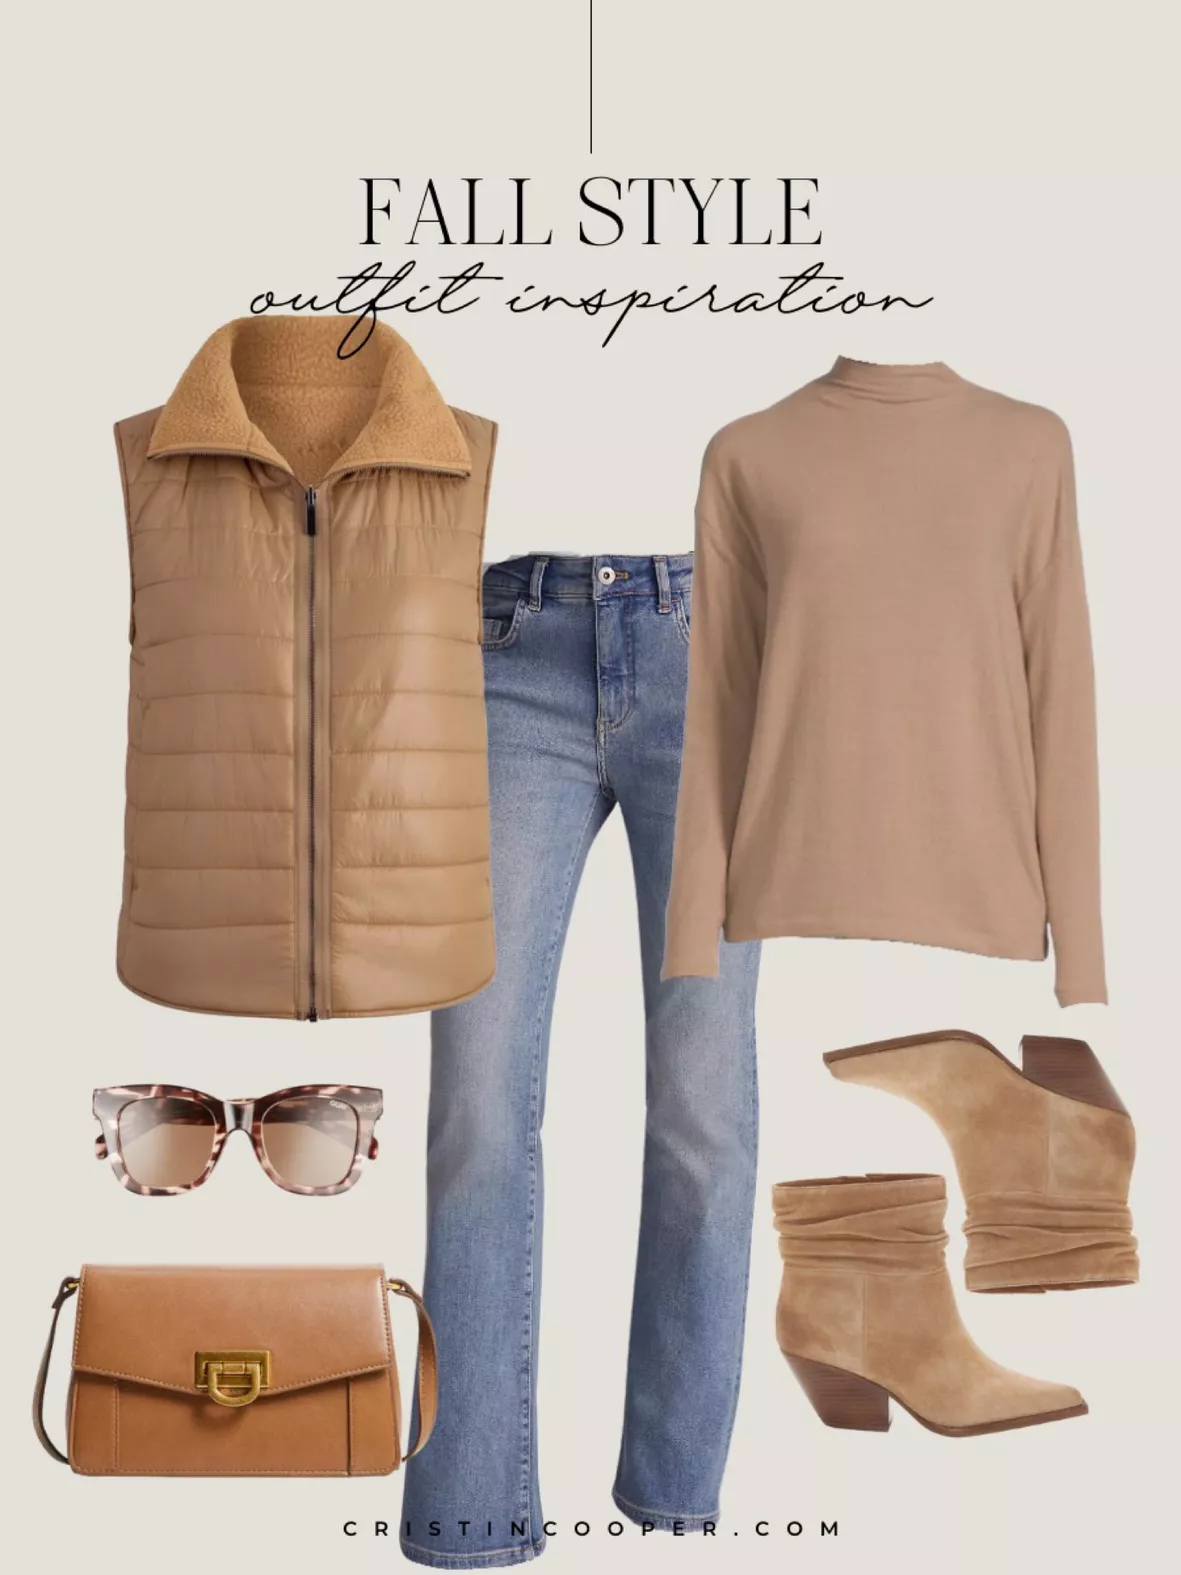 cristincooper's fall style Collection on LTK